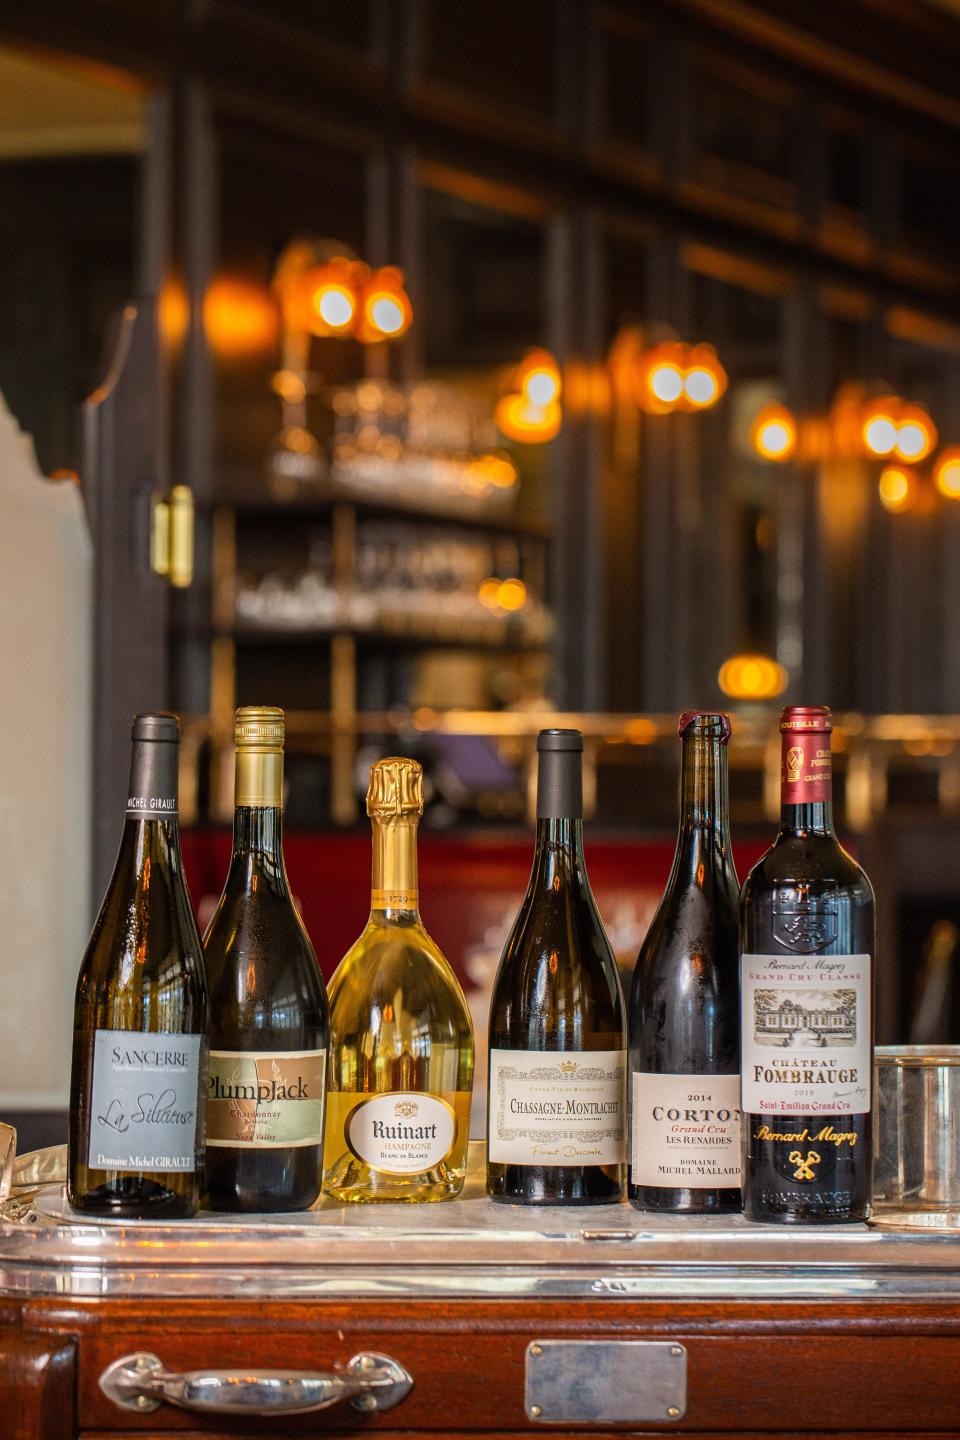 La Goulue offers a full bar with a specialty cocktail menu as well as an extensive wine and champagne list, including more than 20 wines by the glass.